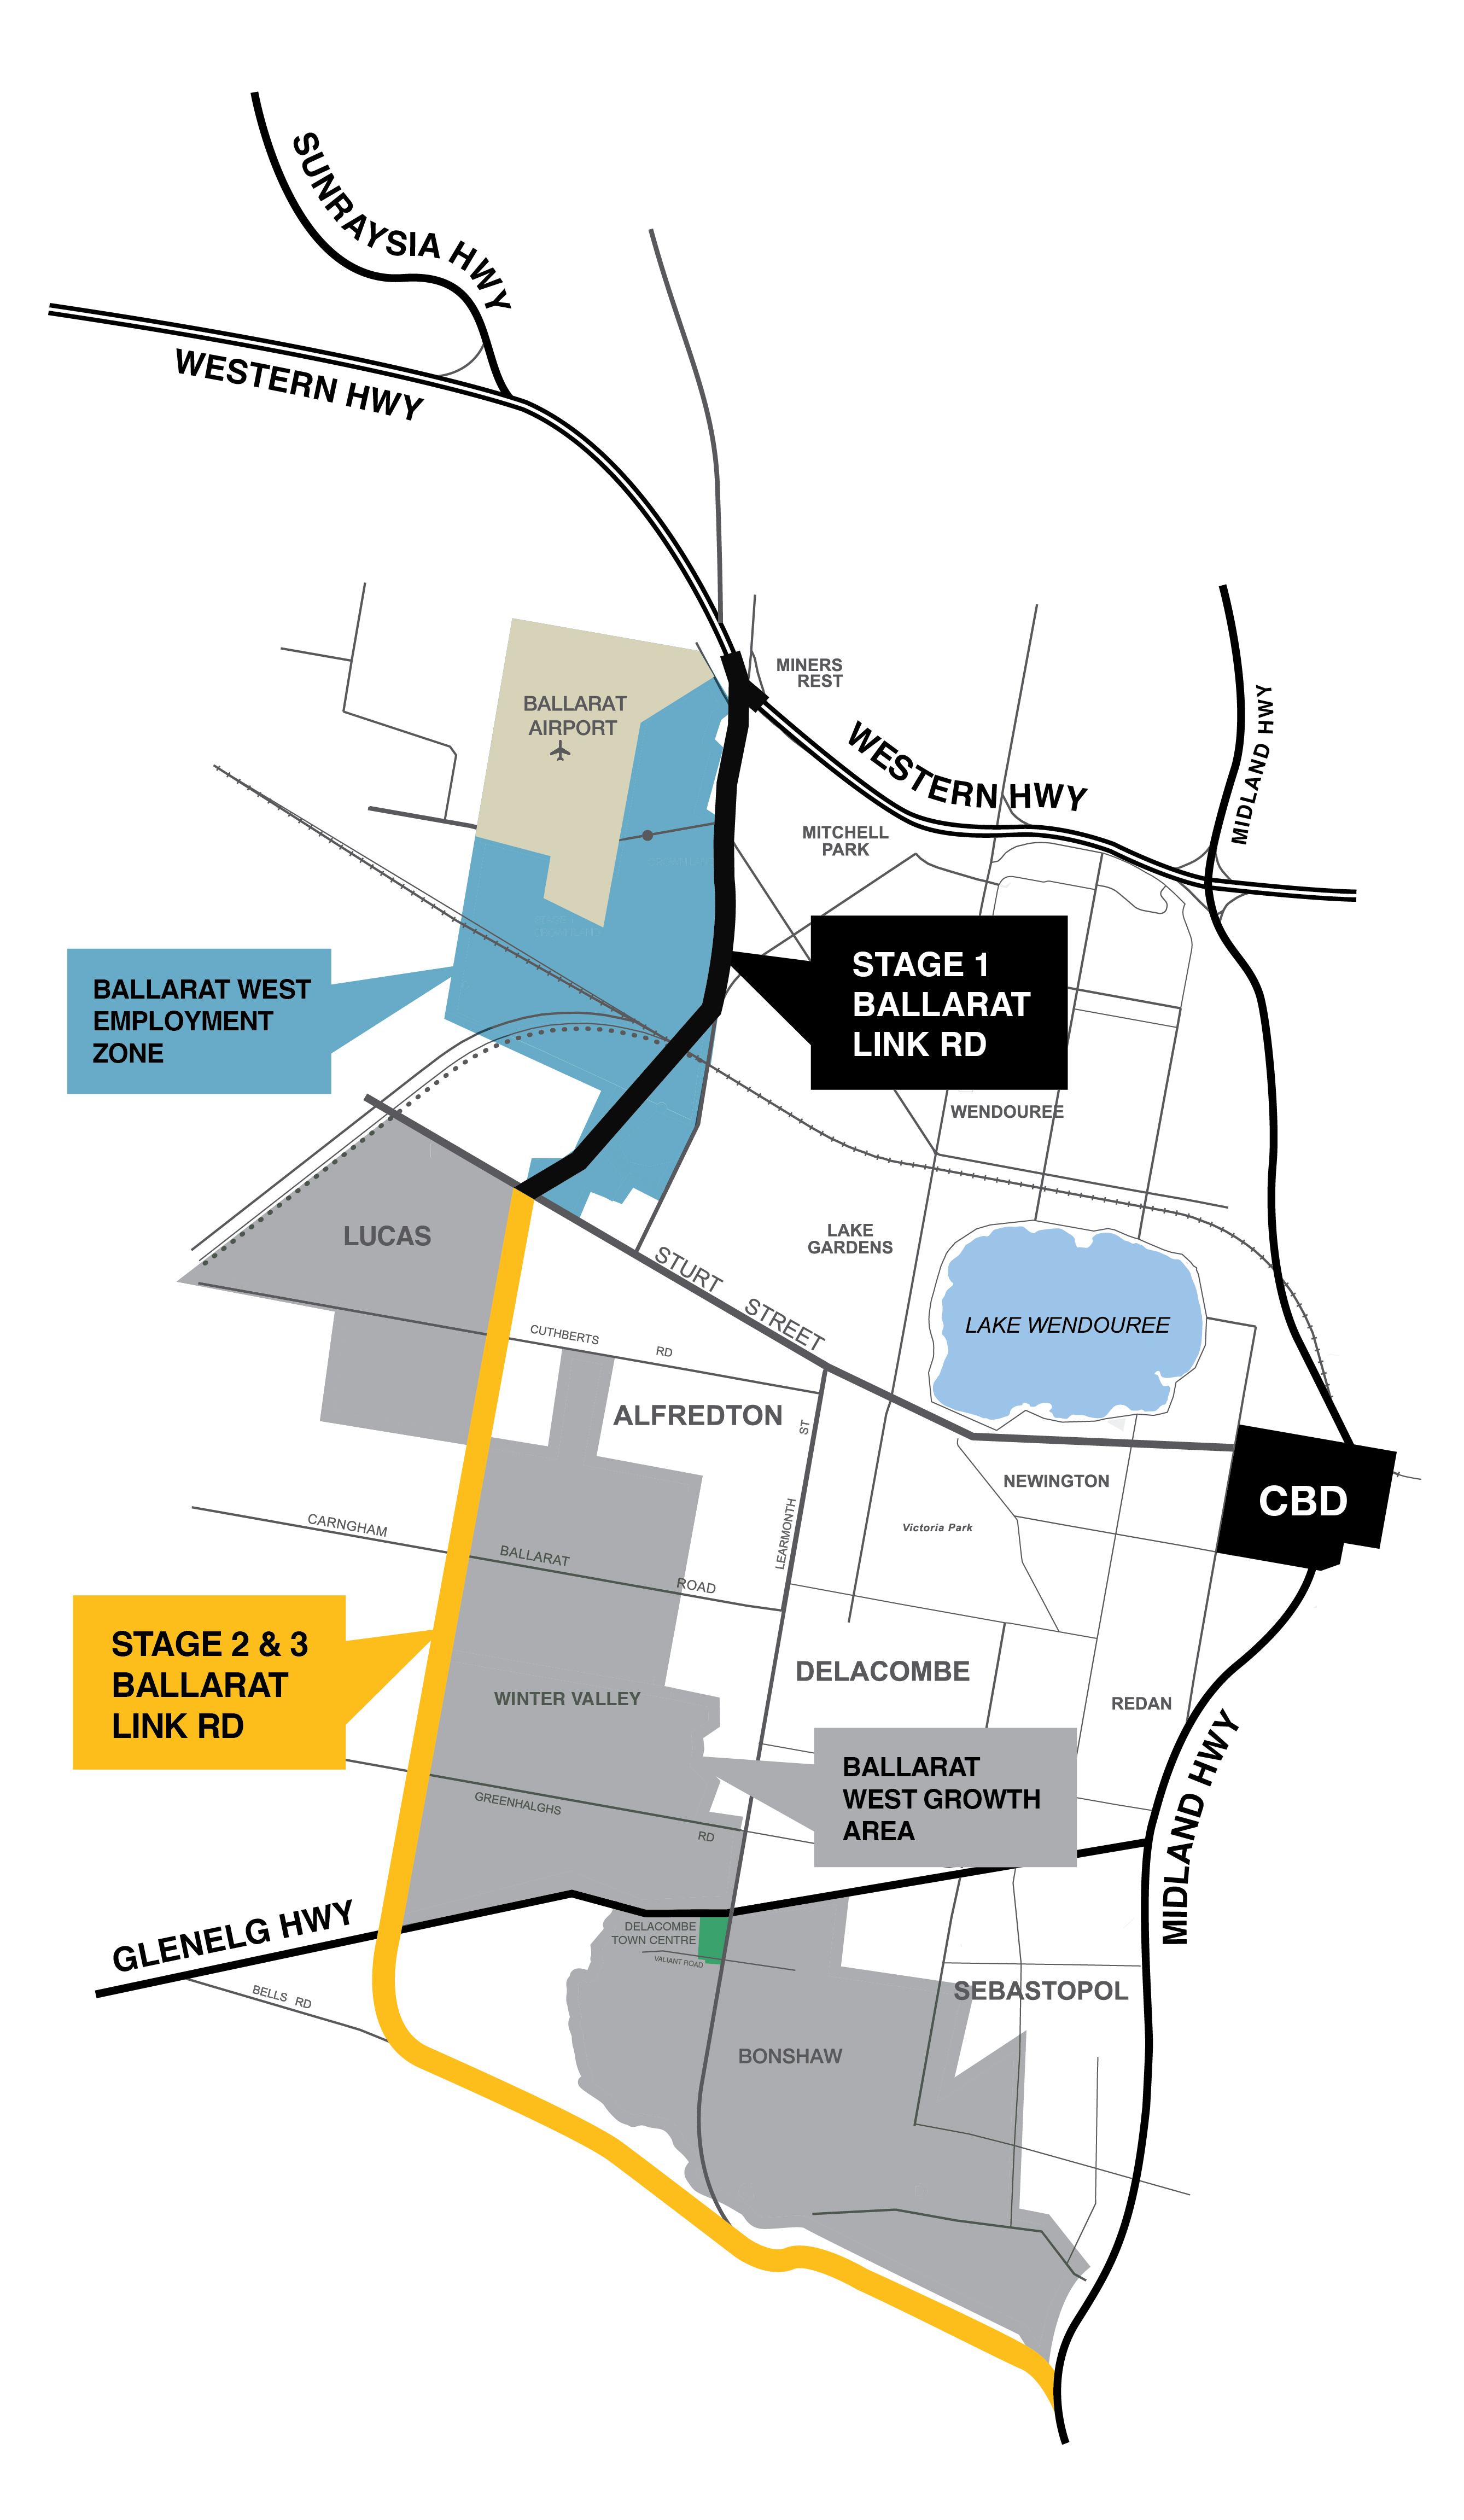 Image of the planned route for Ballarat Link Road. Stages Two and Three of the road will run south from Sturt Street to Glenelg Highway, then slightly south and east to the Midland Highway